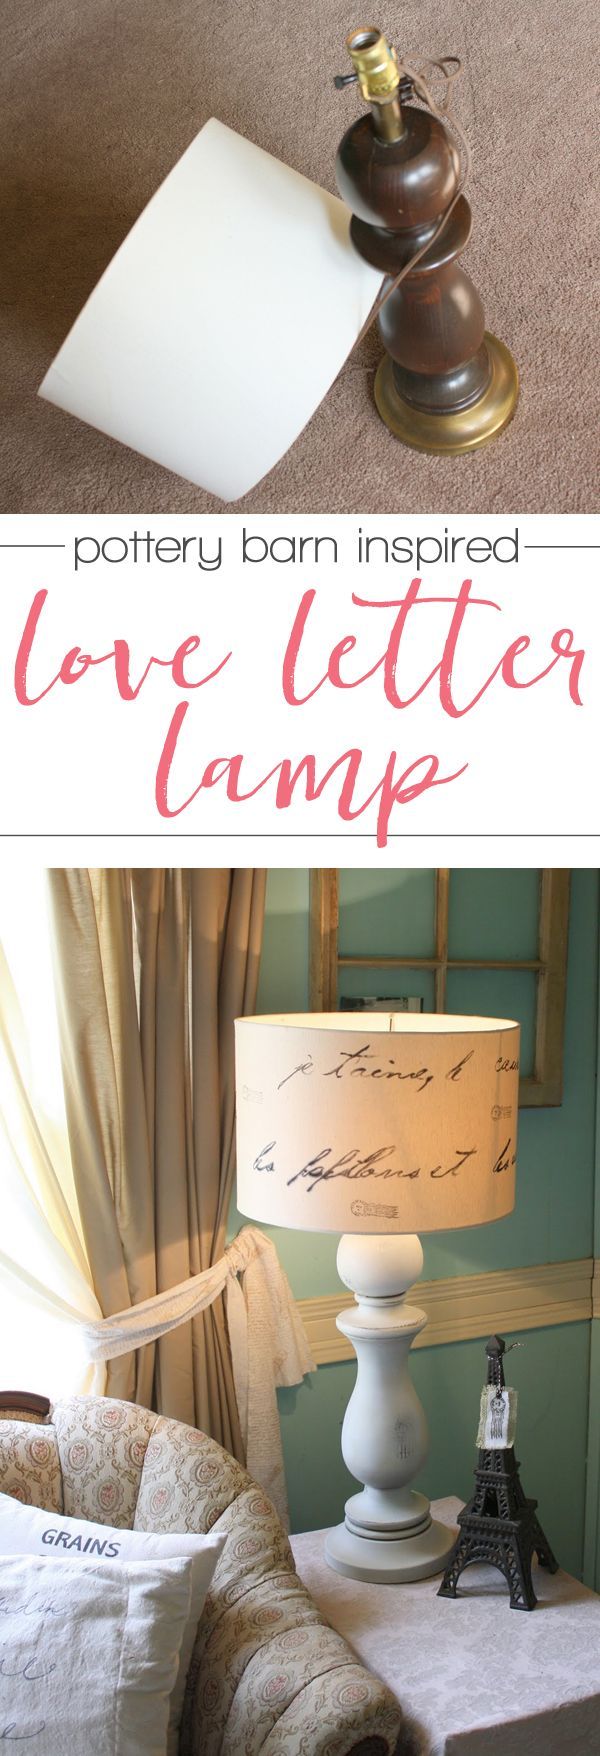 Make your own Pottery Barn inspired lamp on the cheap